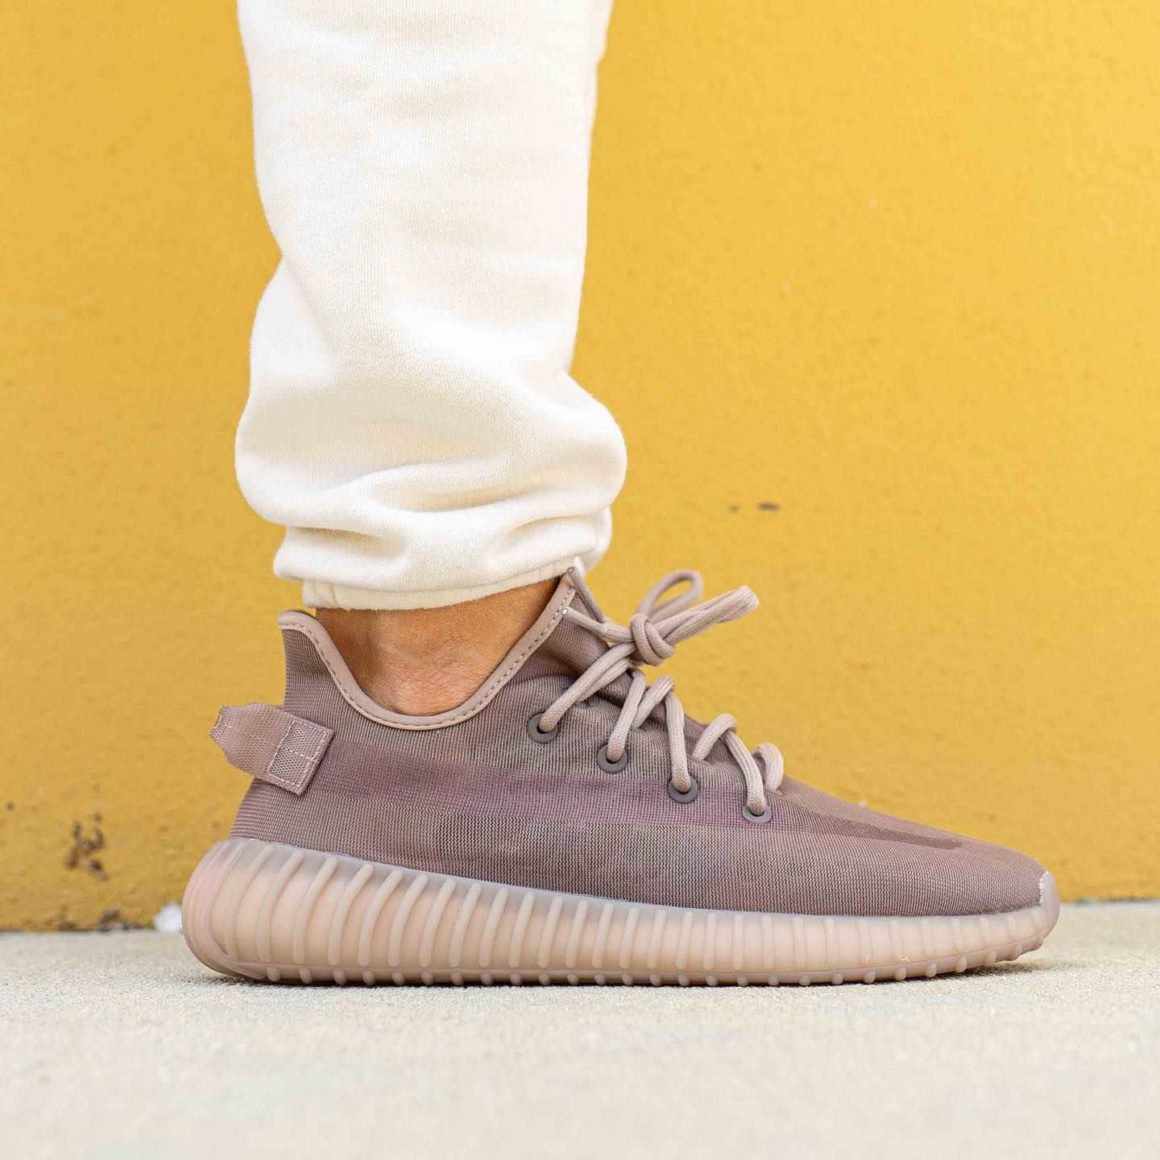 Alle adidas Yeezy Releases 2021 everysize Blog